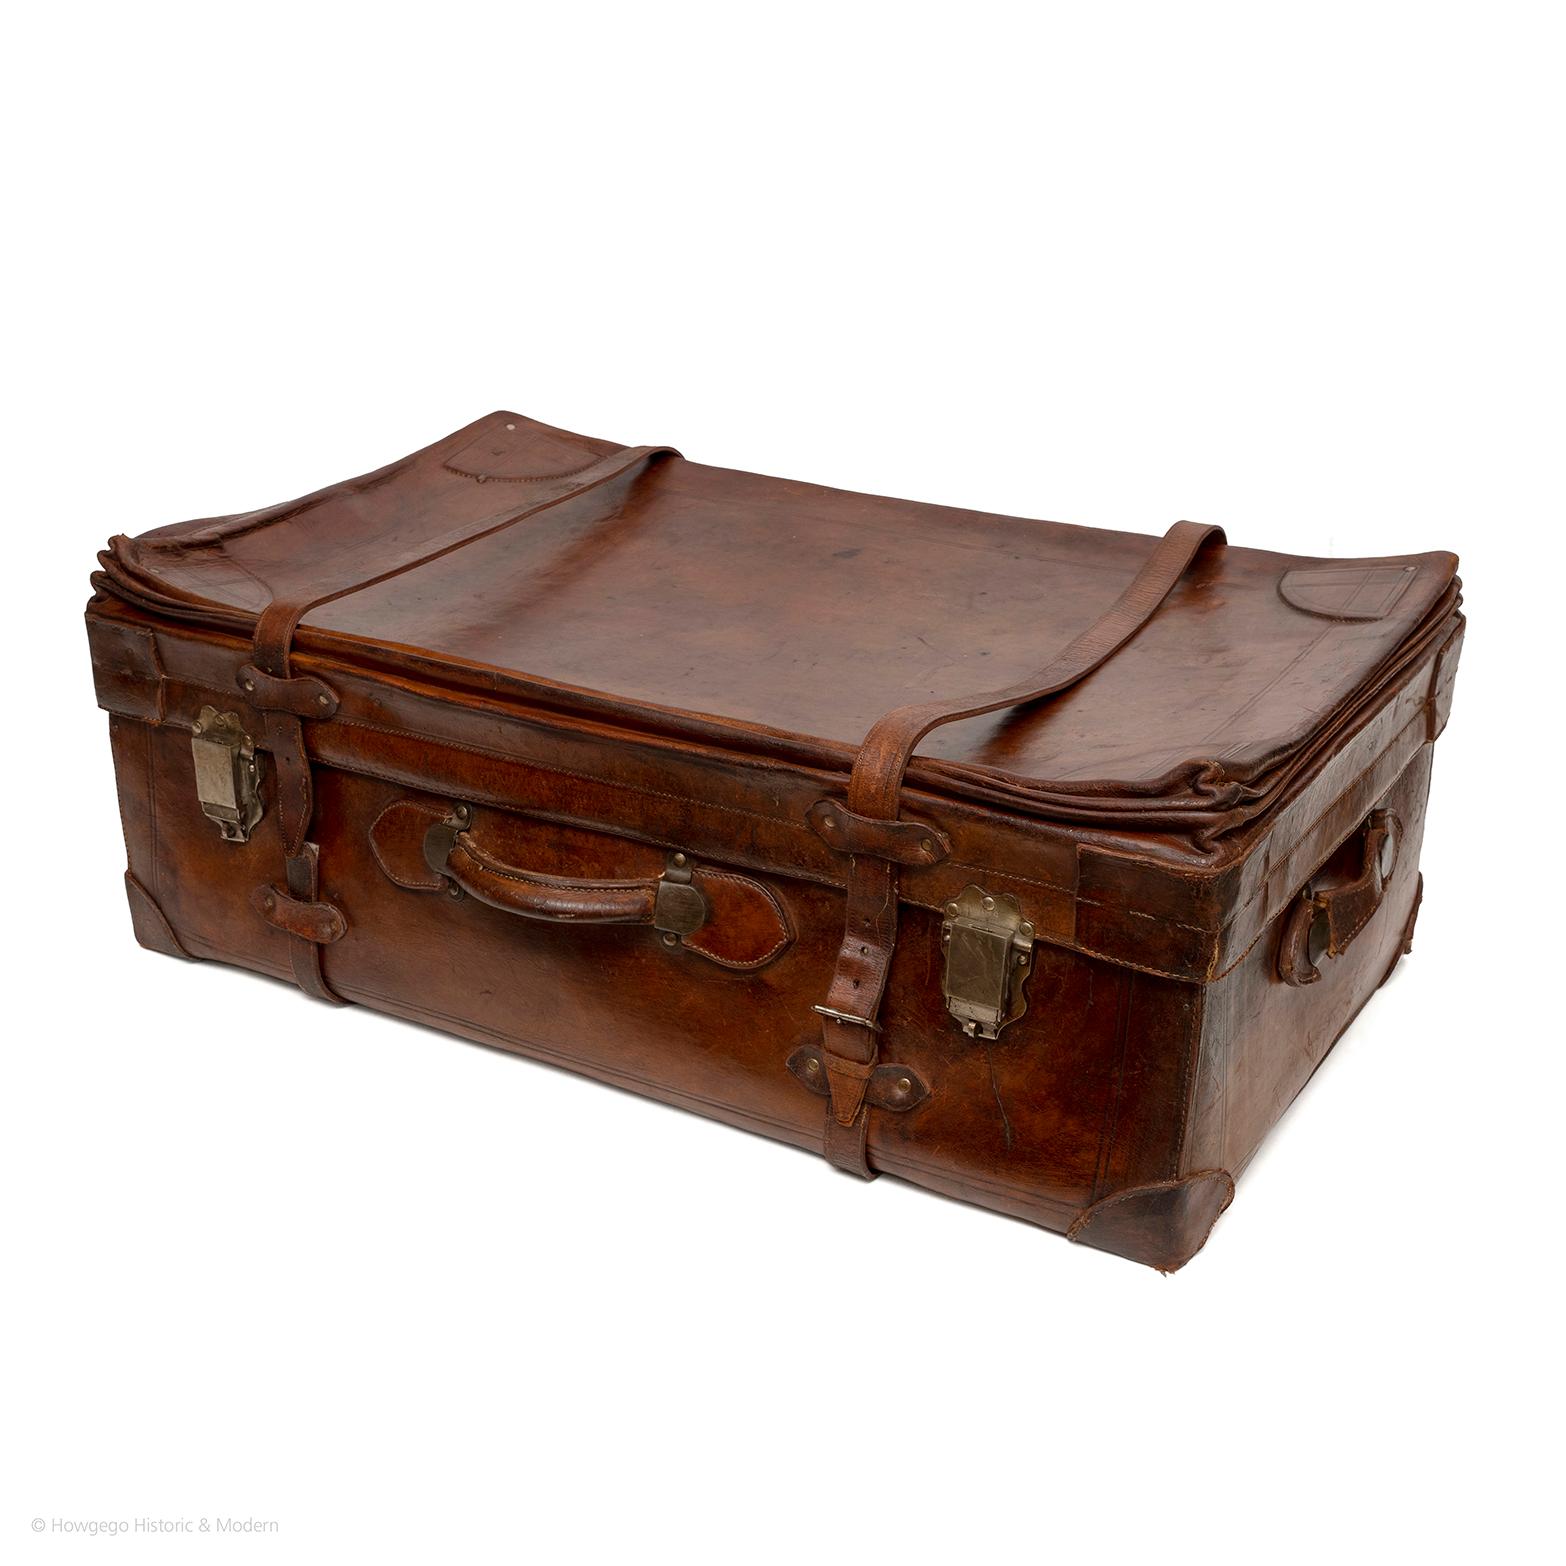 A fine large 19th century, thick, high quality leather overseas travelling trunk with reinforced exposed straps, handles and chrome hardware stamped USA with internal locking mechanism and ring for padlocks.  No key.  Repair to one strap and one